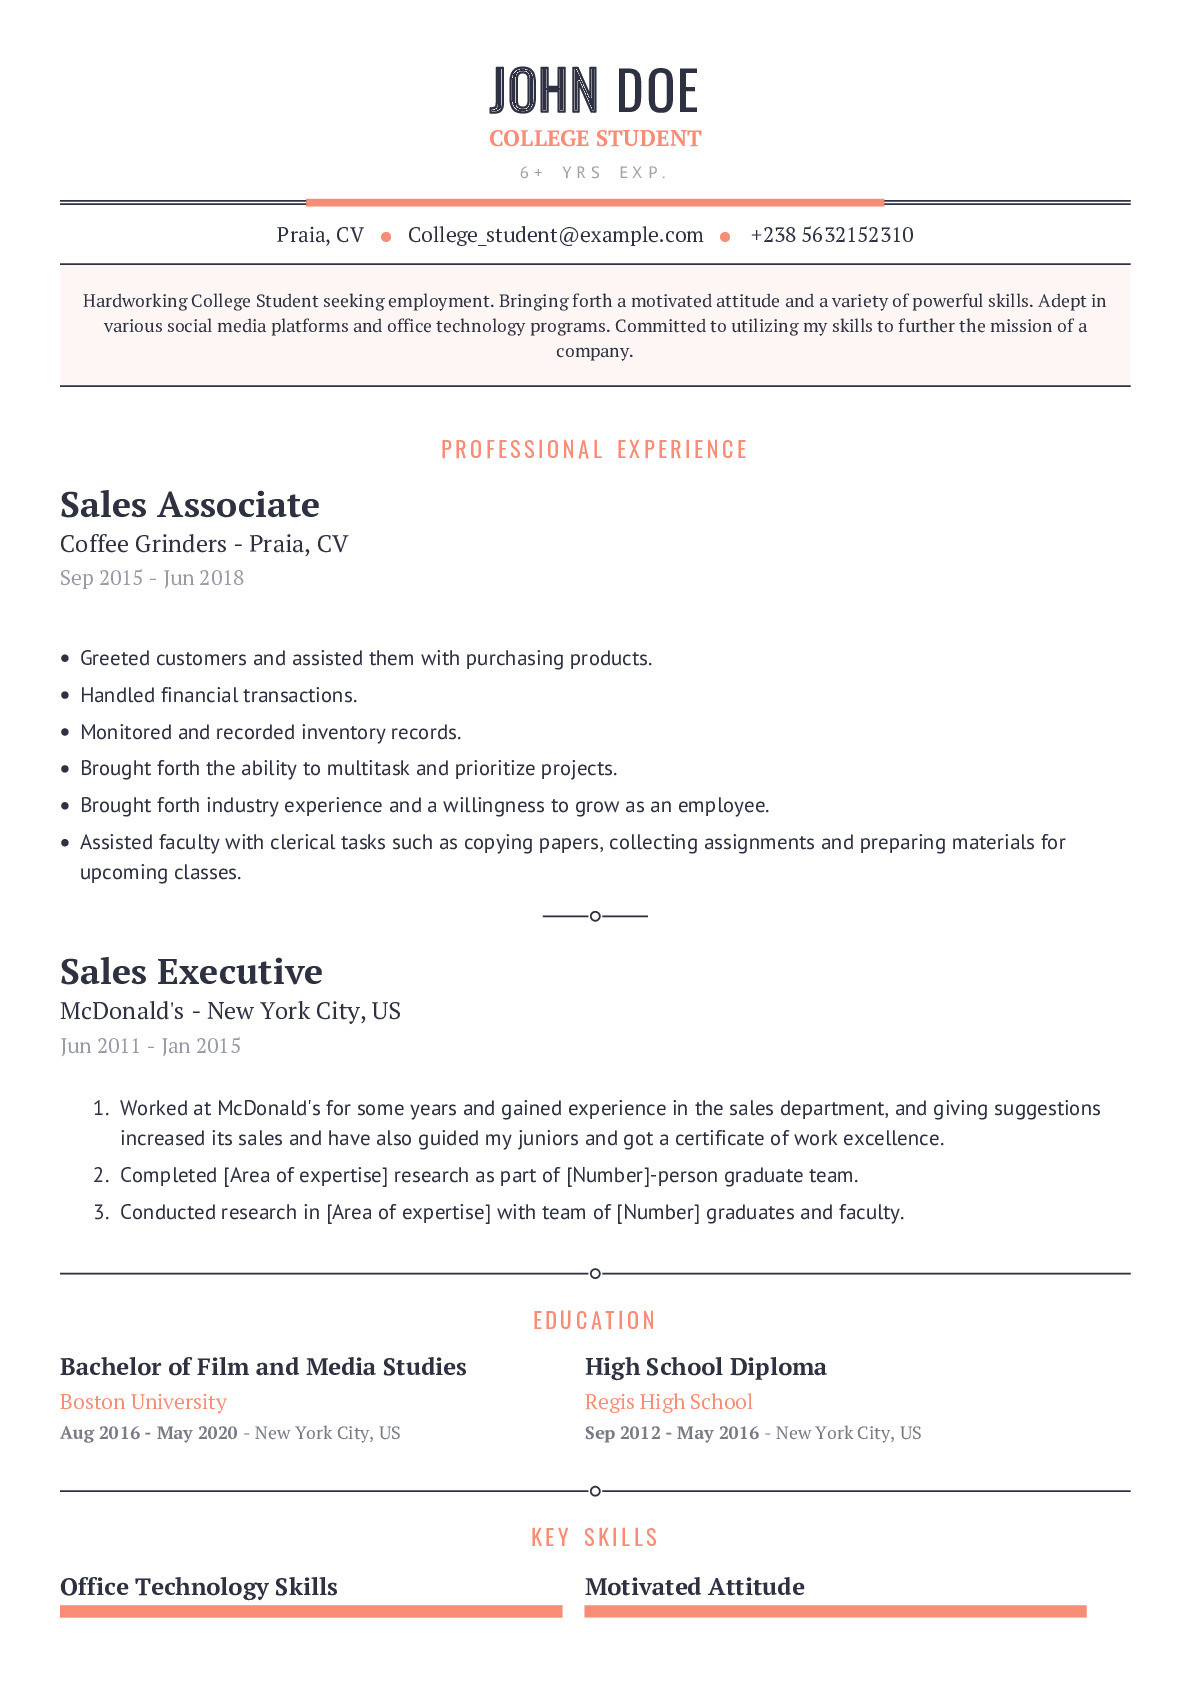 Sample Resume for when In College College Student Resume Example with Content Sample Craftmycv